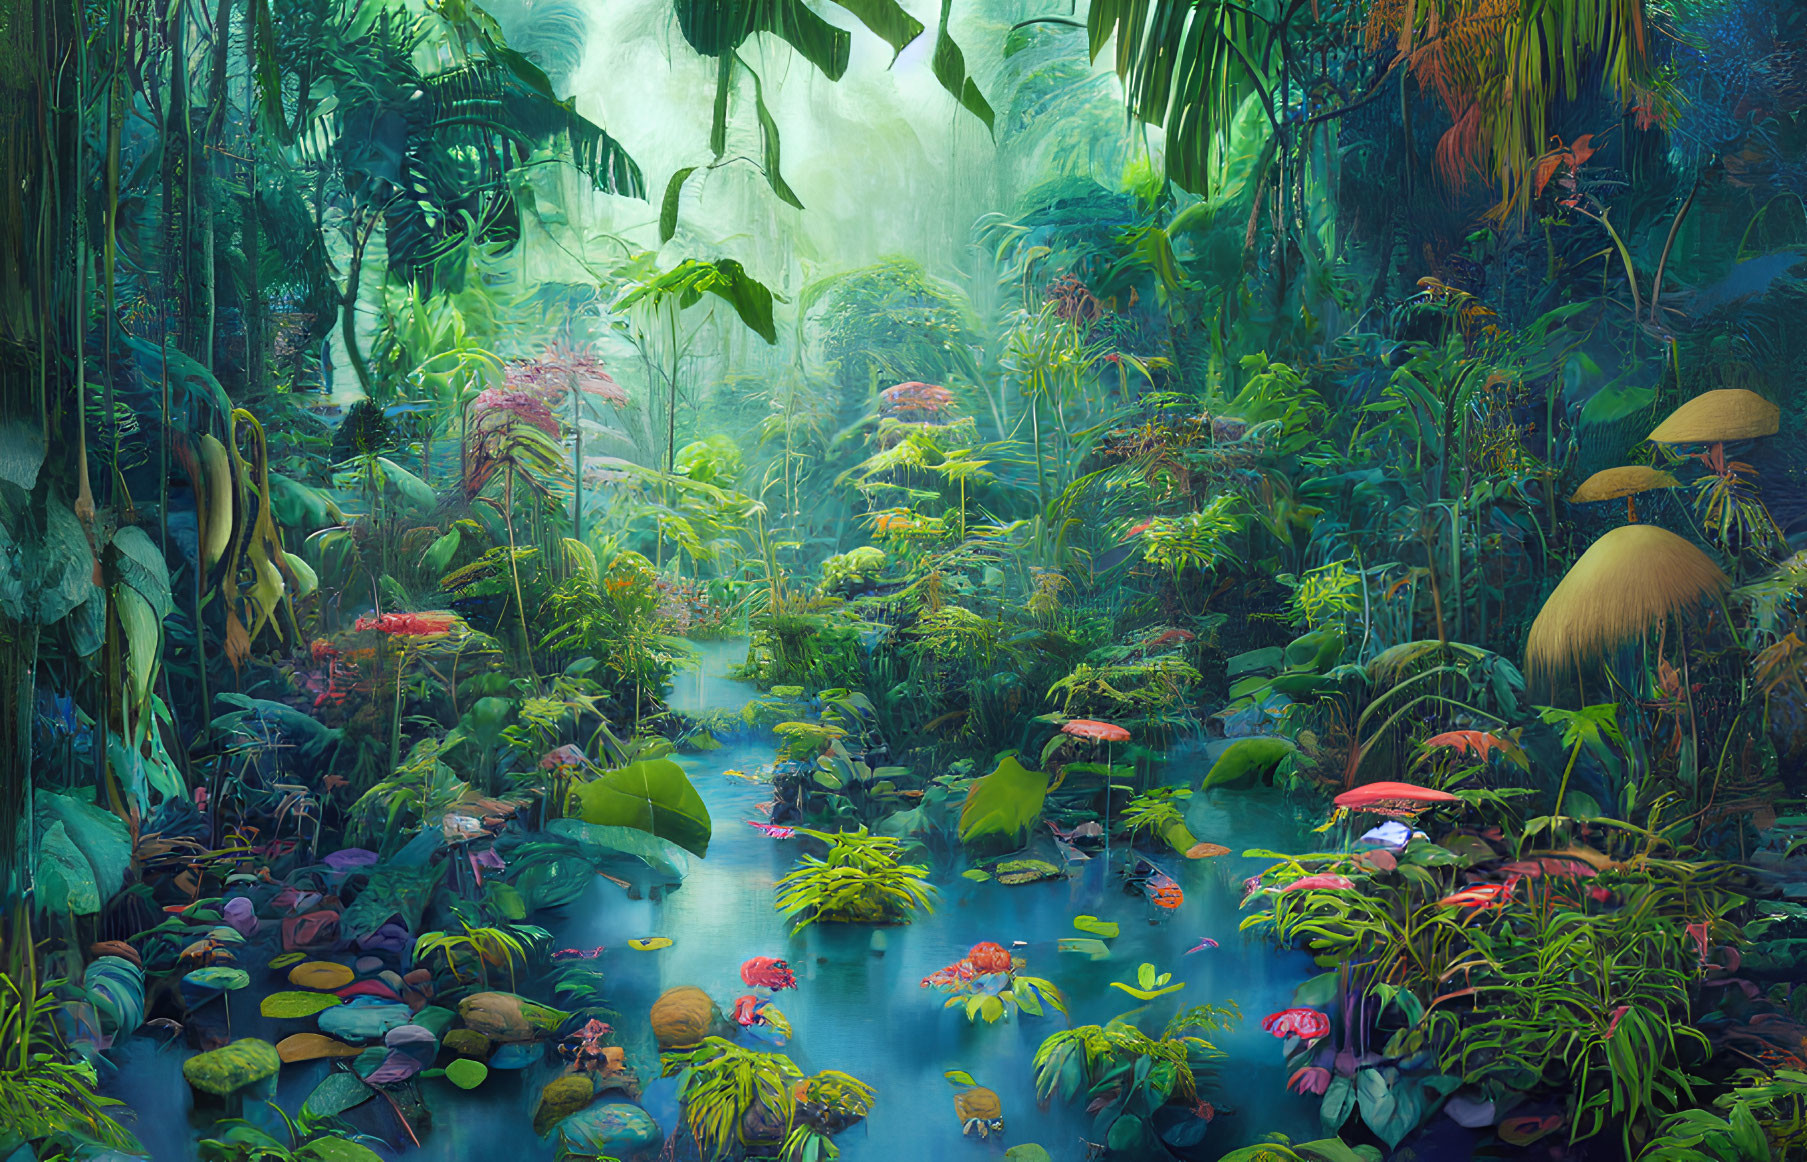 Mystical jungle with blue stream, lush foliage, flowers, and oversized mushrooms